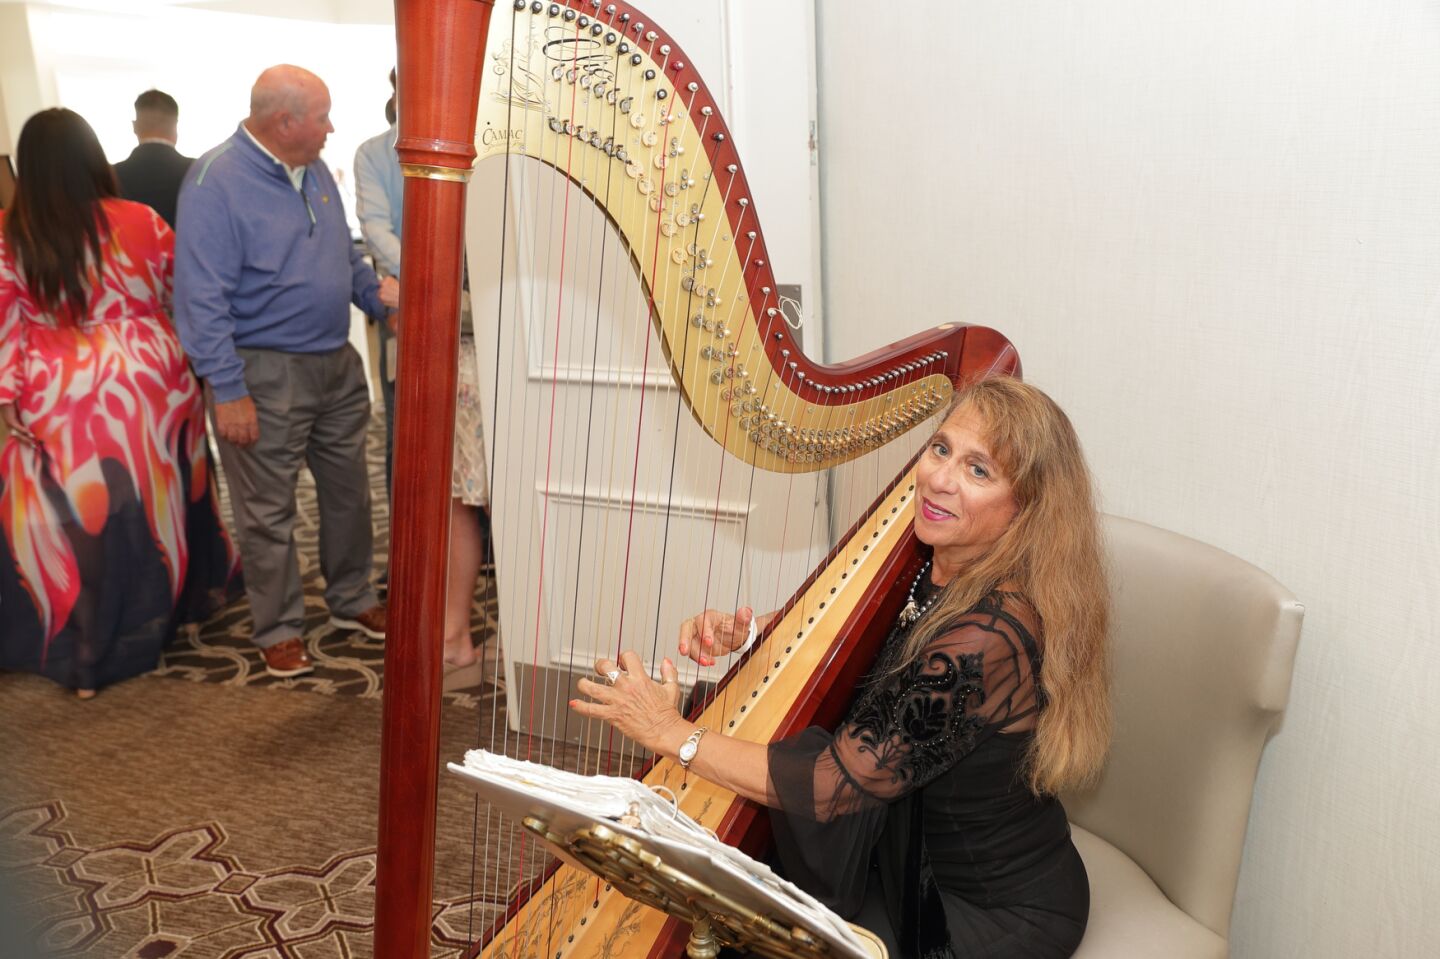 Musical entertainment for the VIP reception was provided by Devora on the harp